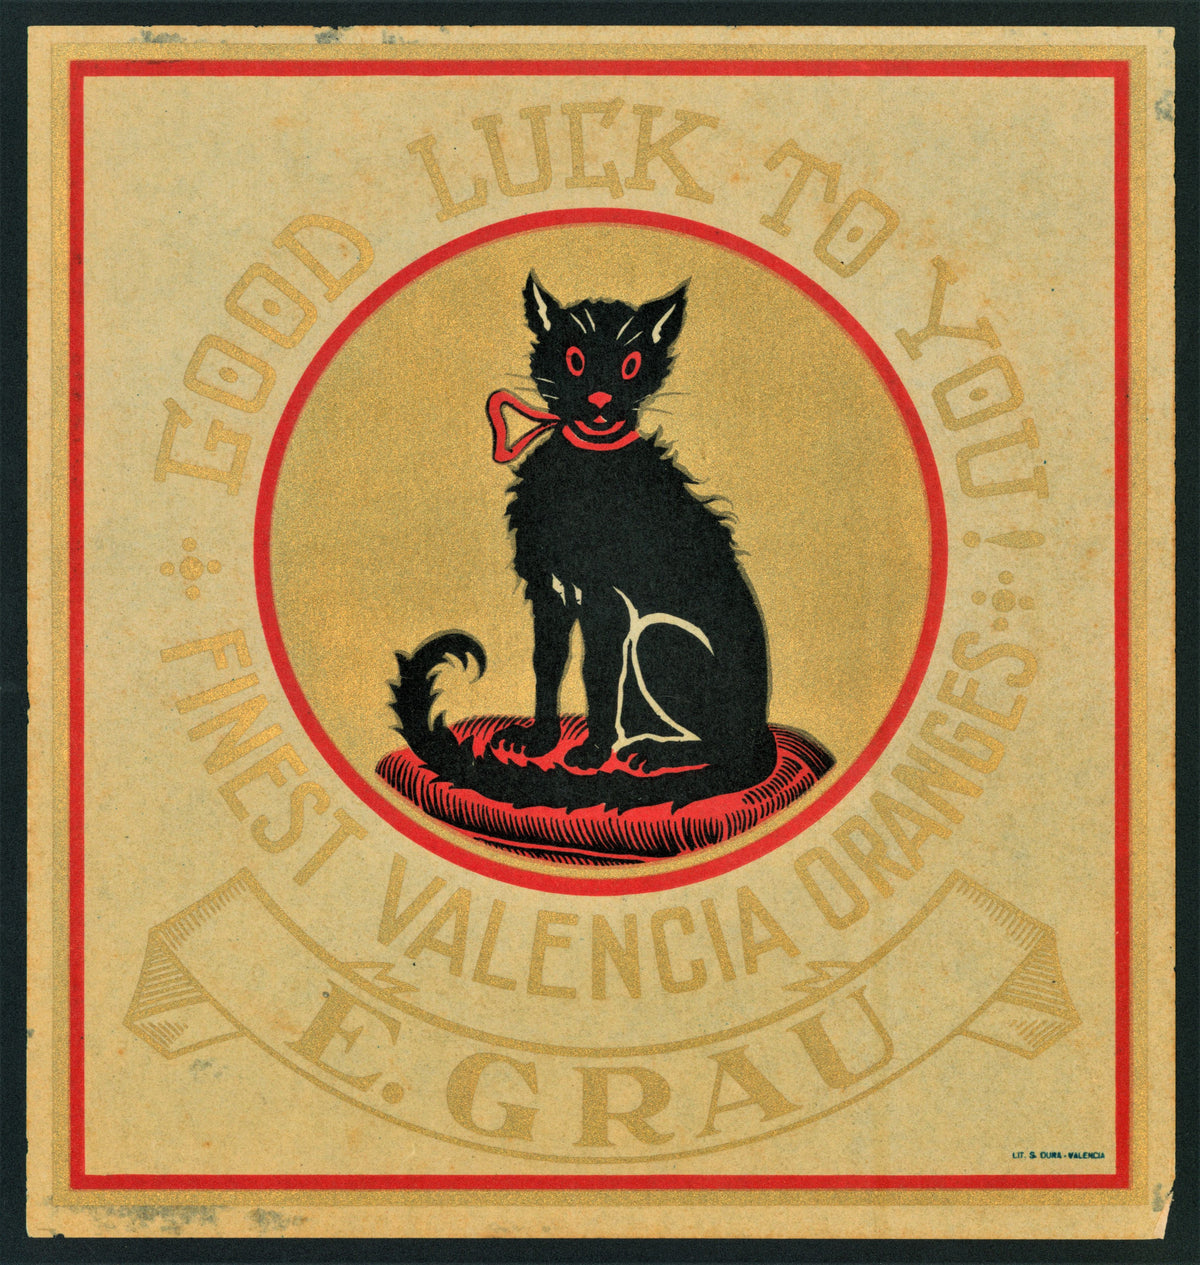 Good Luck to You- Spanish Crate Label - Authentic Vintage Antique Print